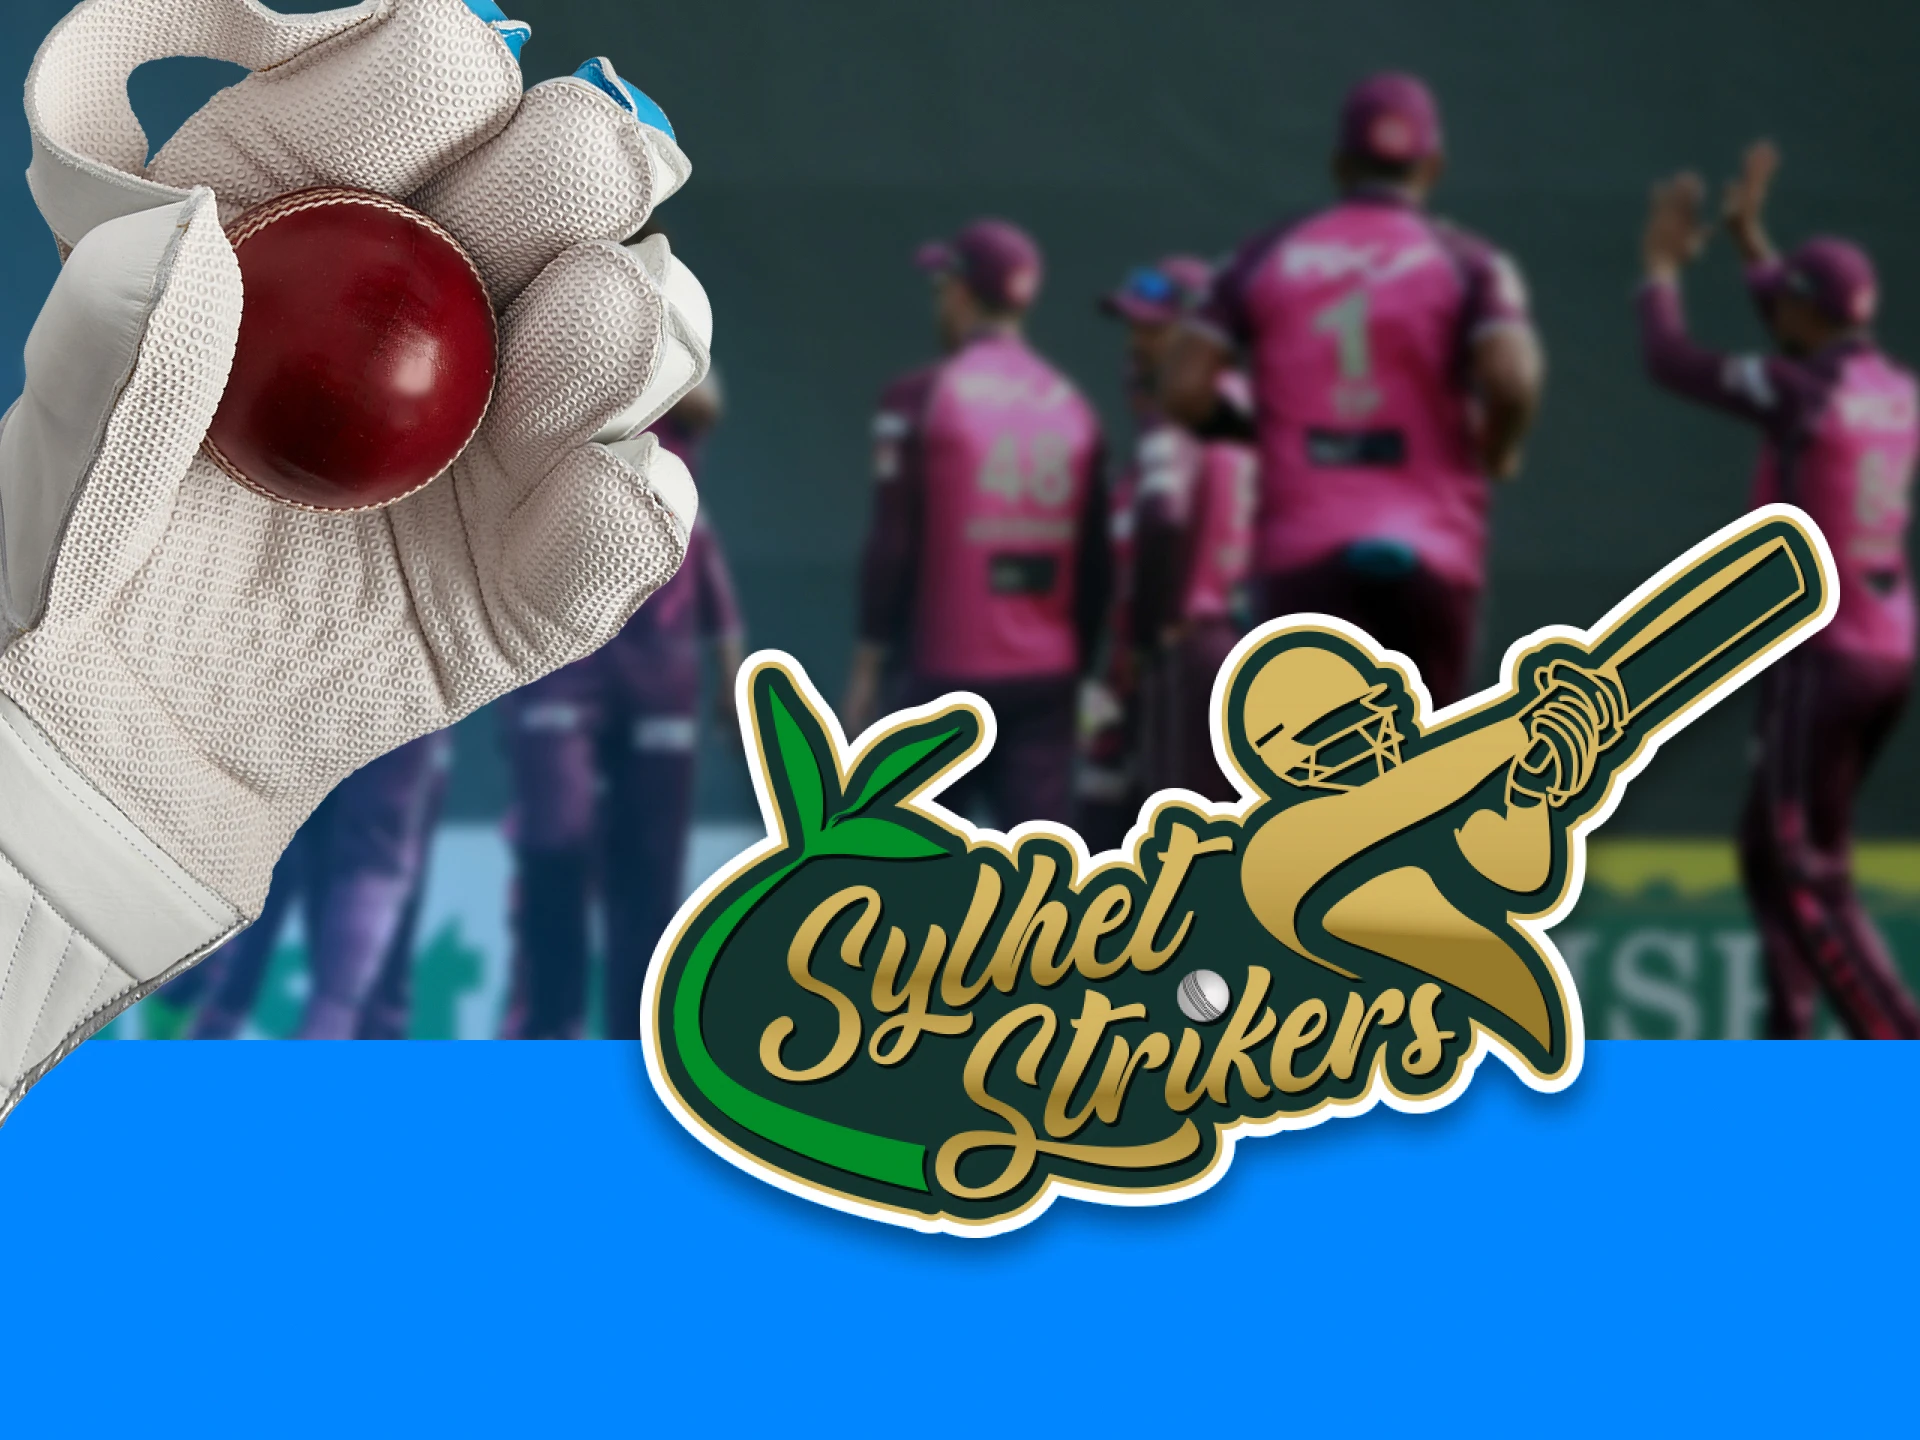 The Sylhet Strikers joined the Bangladesh Premier League in 2012.